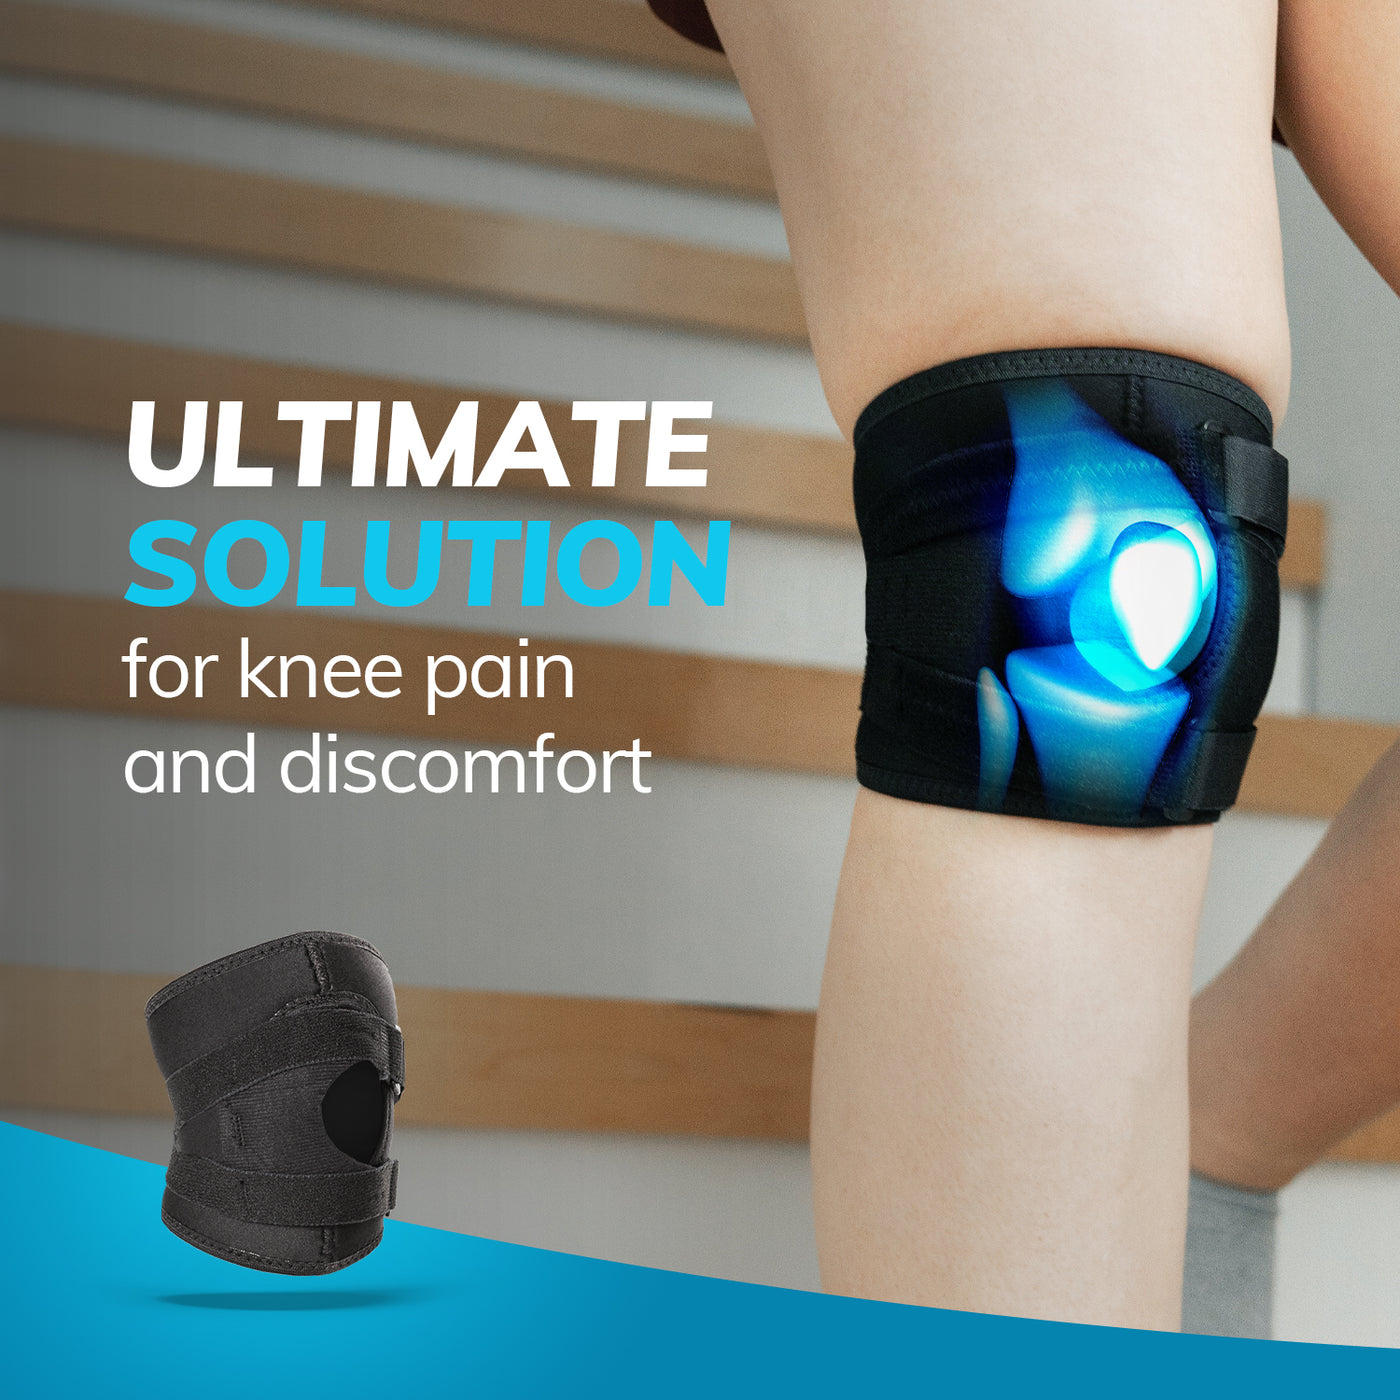 Our short exercise knee pain brace is the ultimate solution for knee pain and discomfort